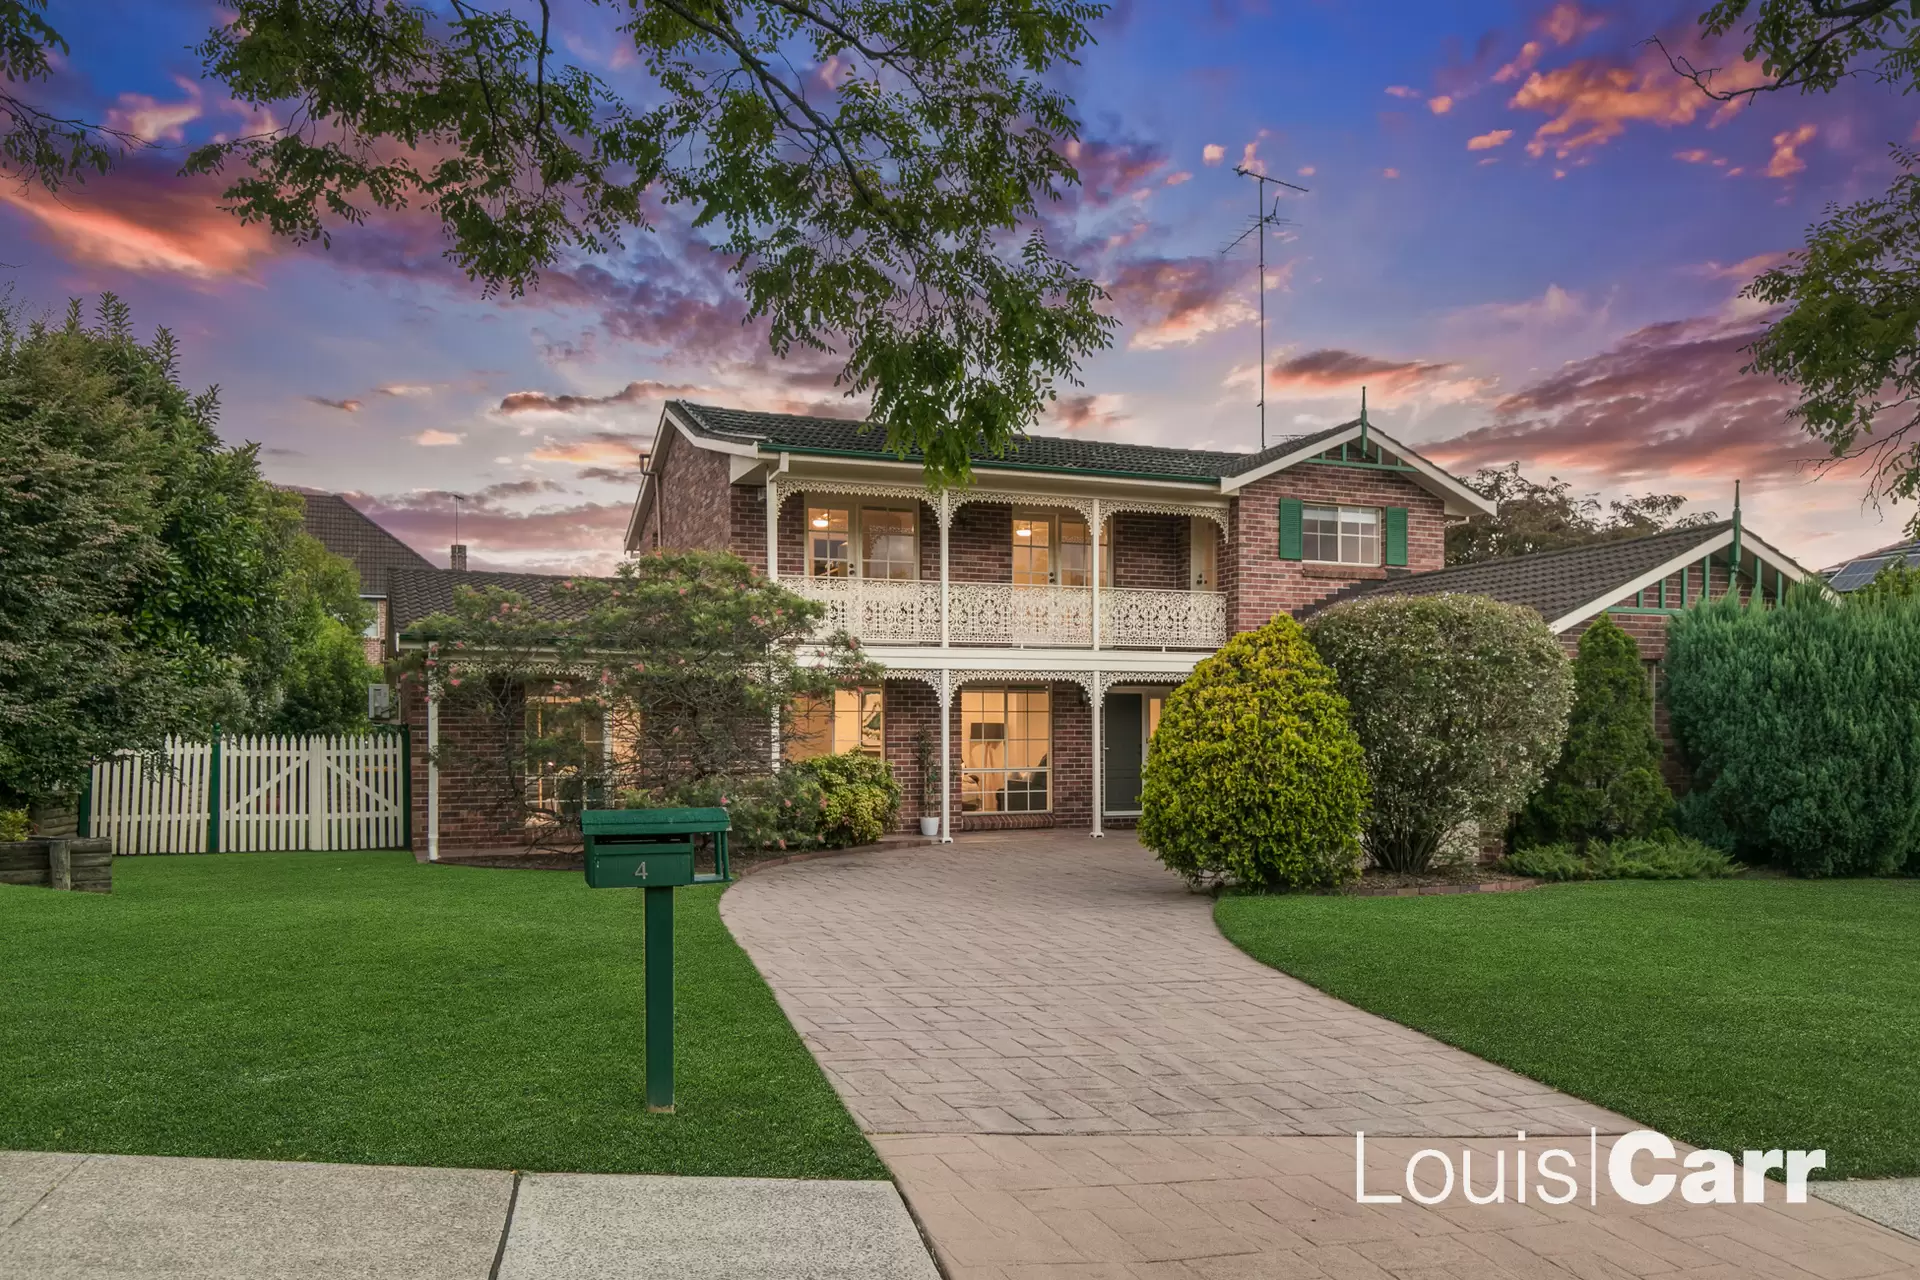 Photo #1: 4 Bowen Close, Cherrybrook - Sold by Louis Carr Real Estate